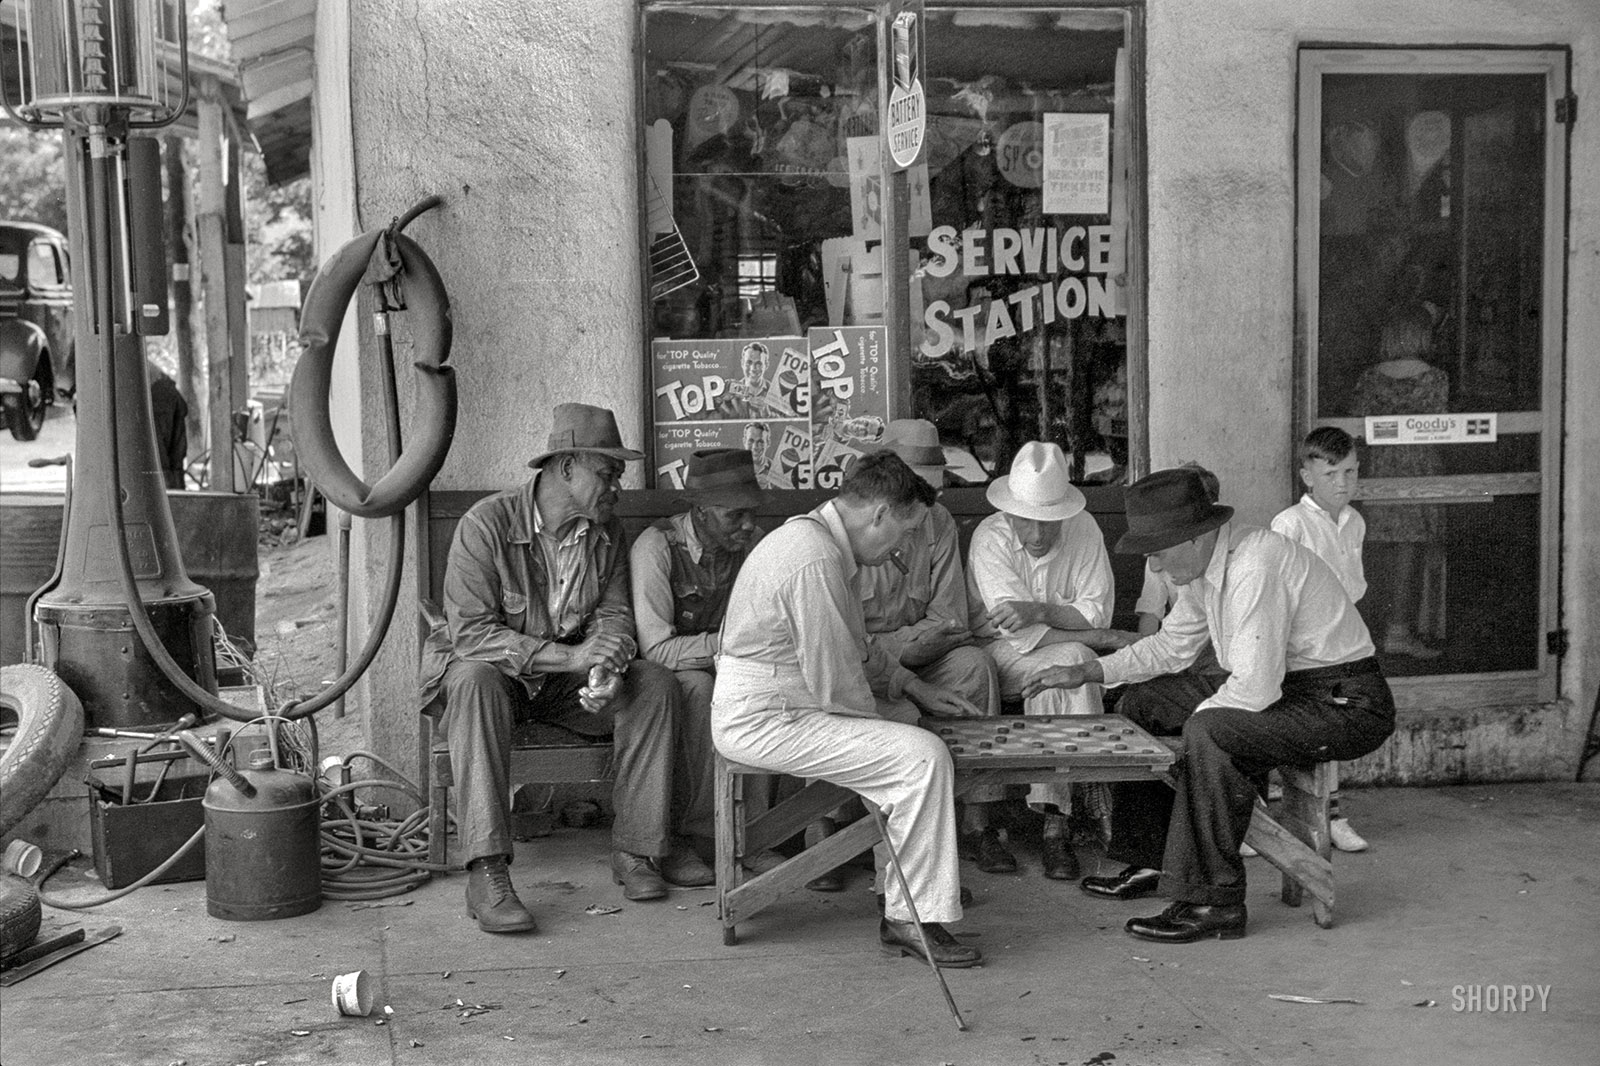 June 1939. "Greensboro, Greene County, Georgia. Playing checkers outside a service station on a Saturday afternoon." 35mm nitrate negative by Marion Post Wolcott for the Farm Security Administration. View full size.